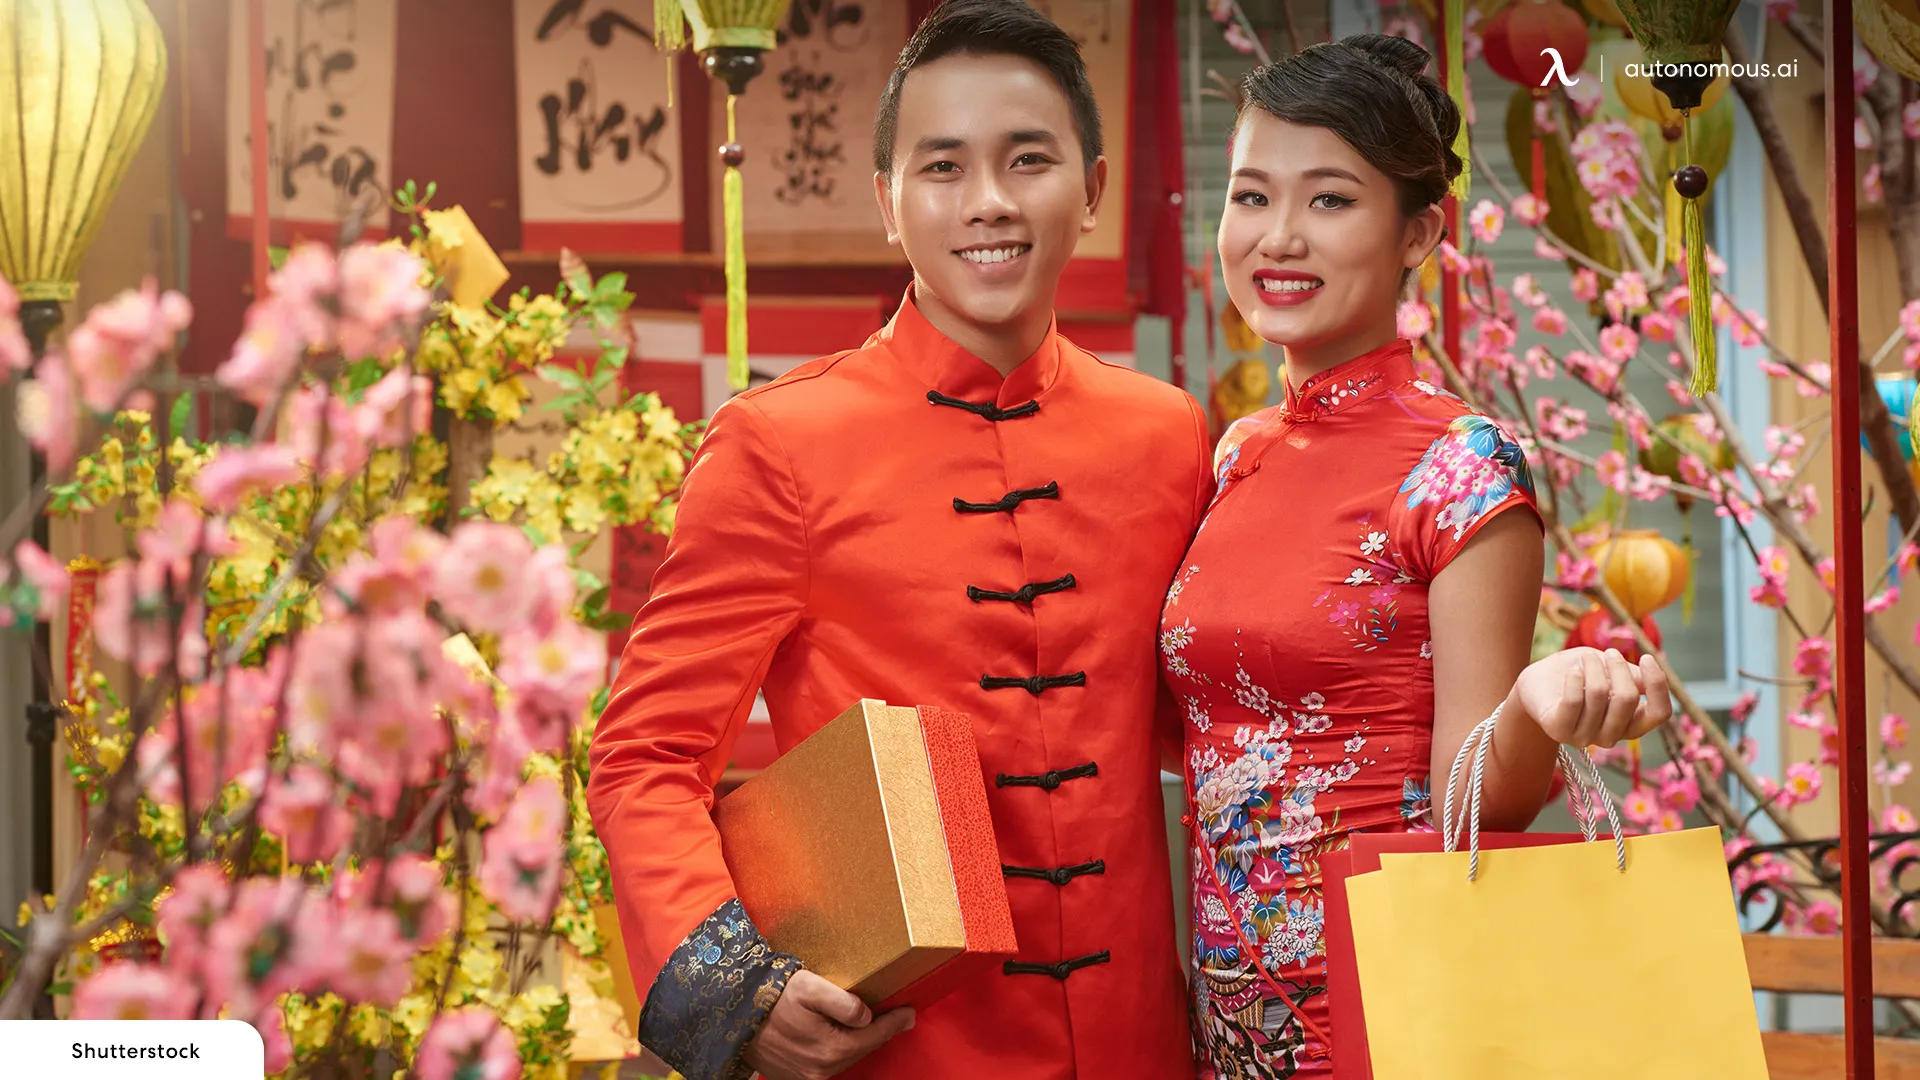 Online Shopping Tips for Making the Most of Lunar New Year Sales